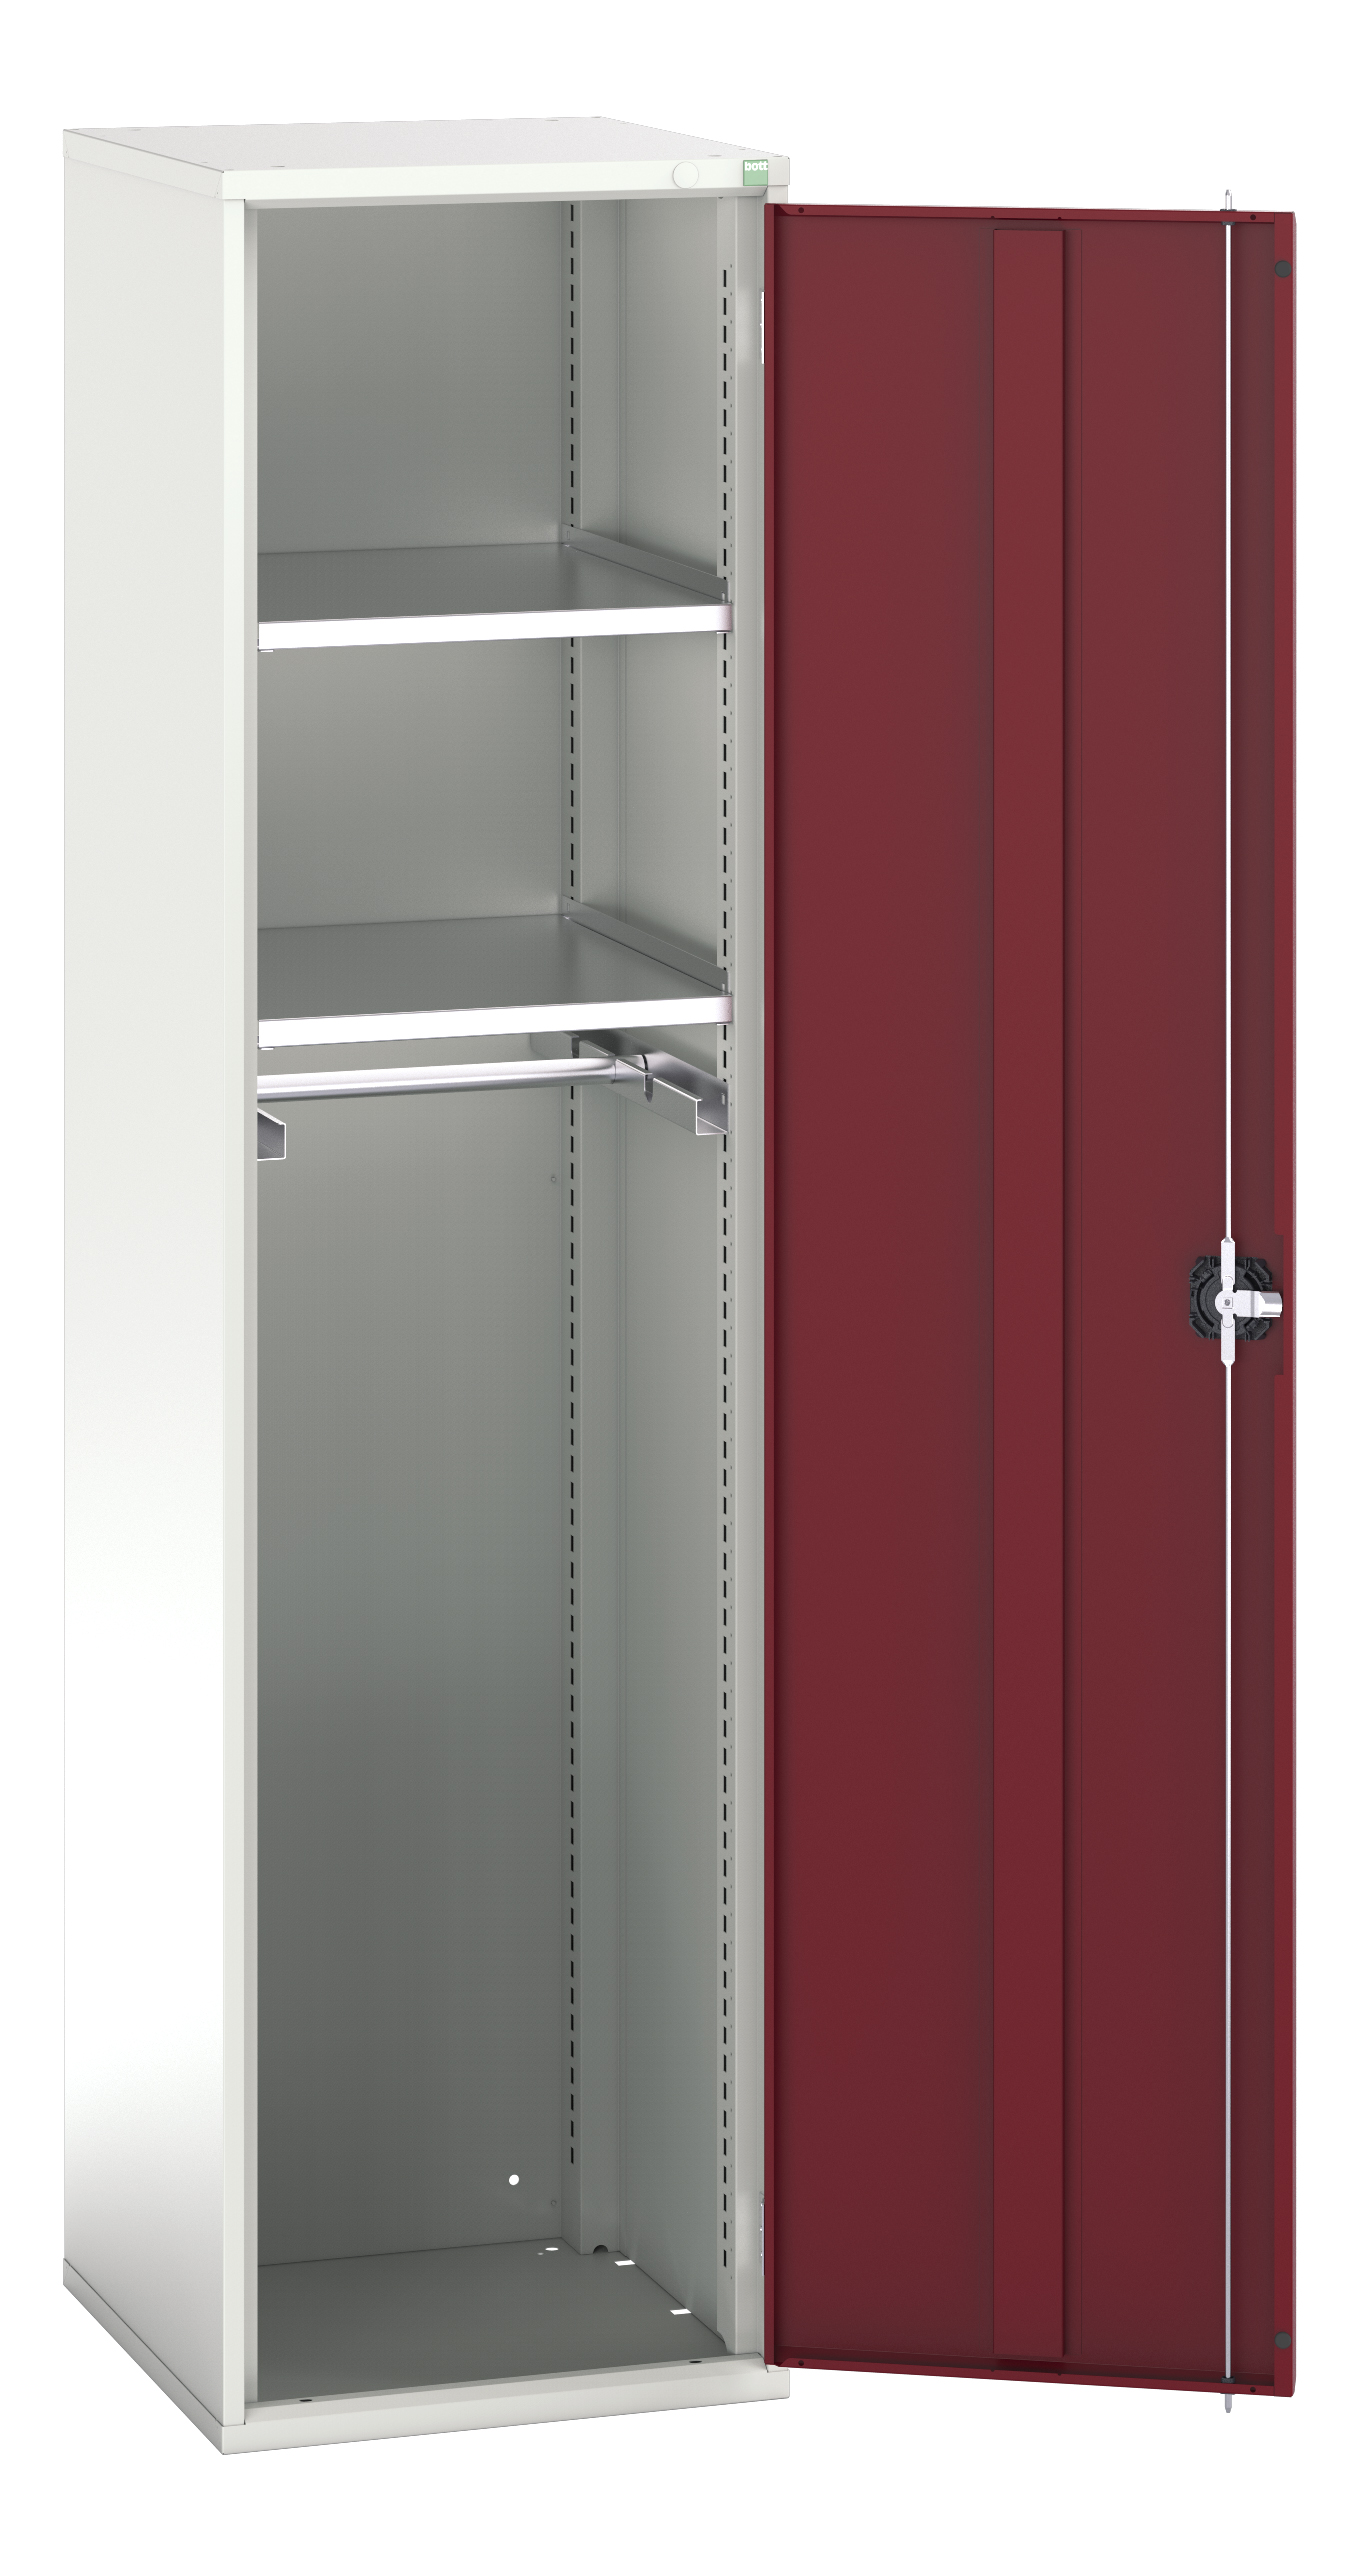 Bott Verso Ppe / Janitorial Kitted Cupboard - 16926351.24